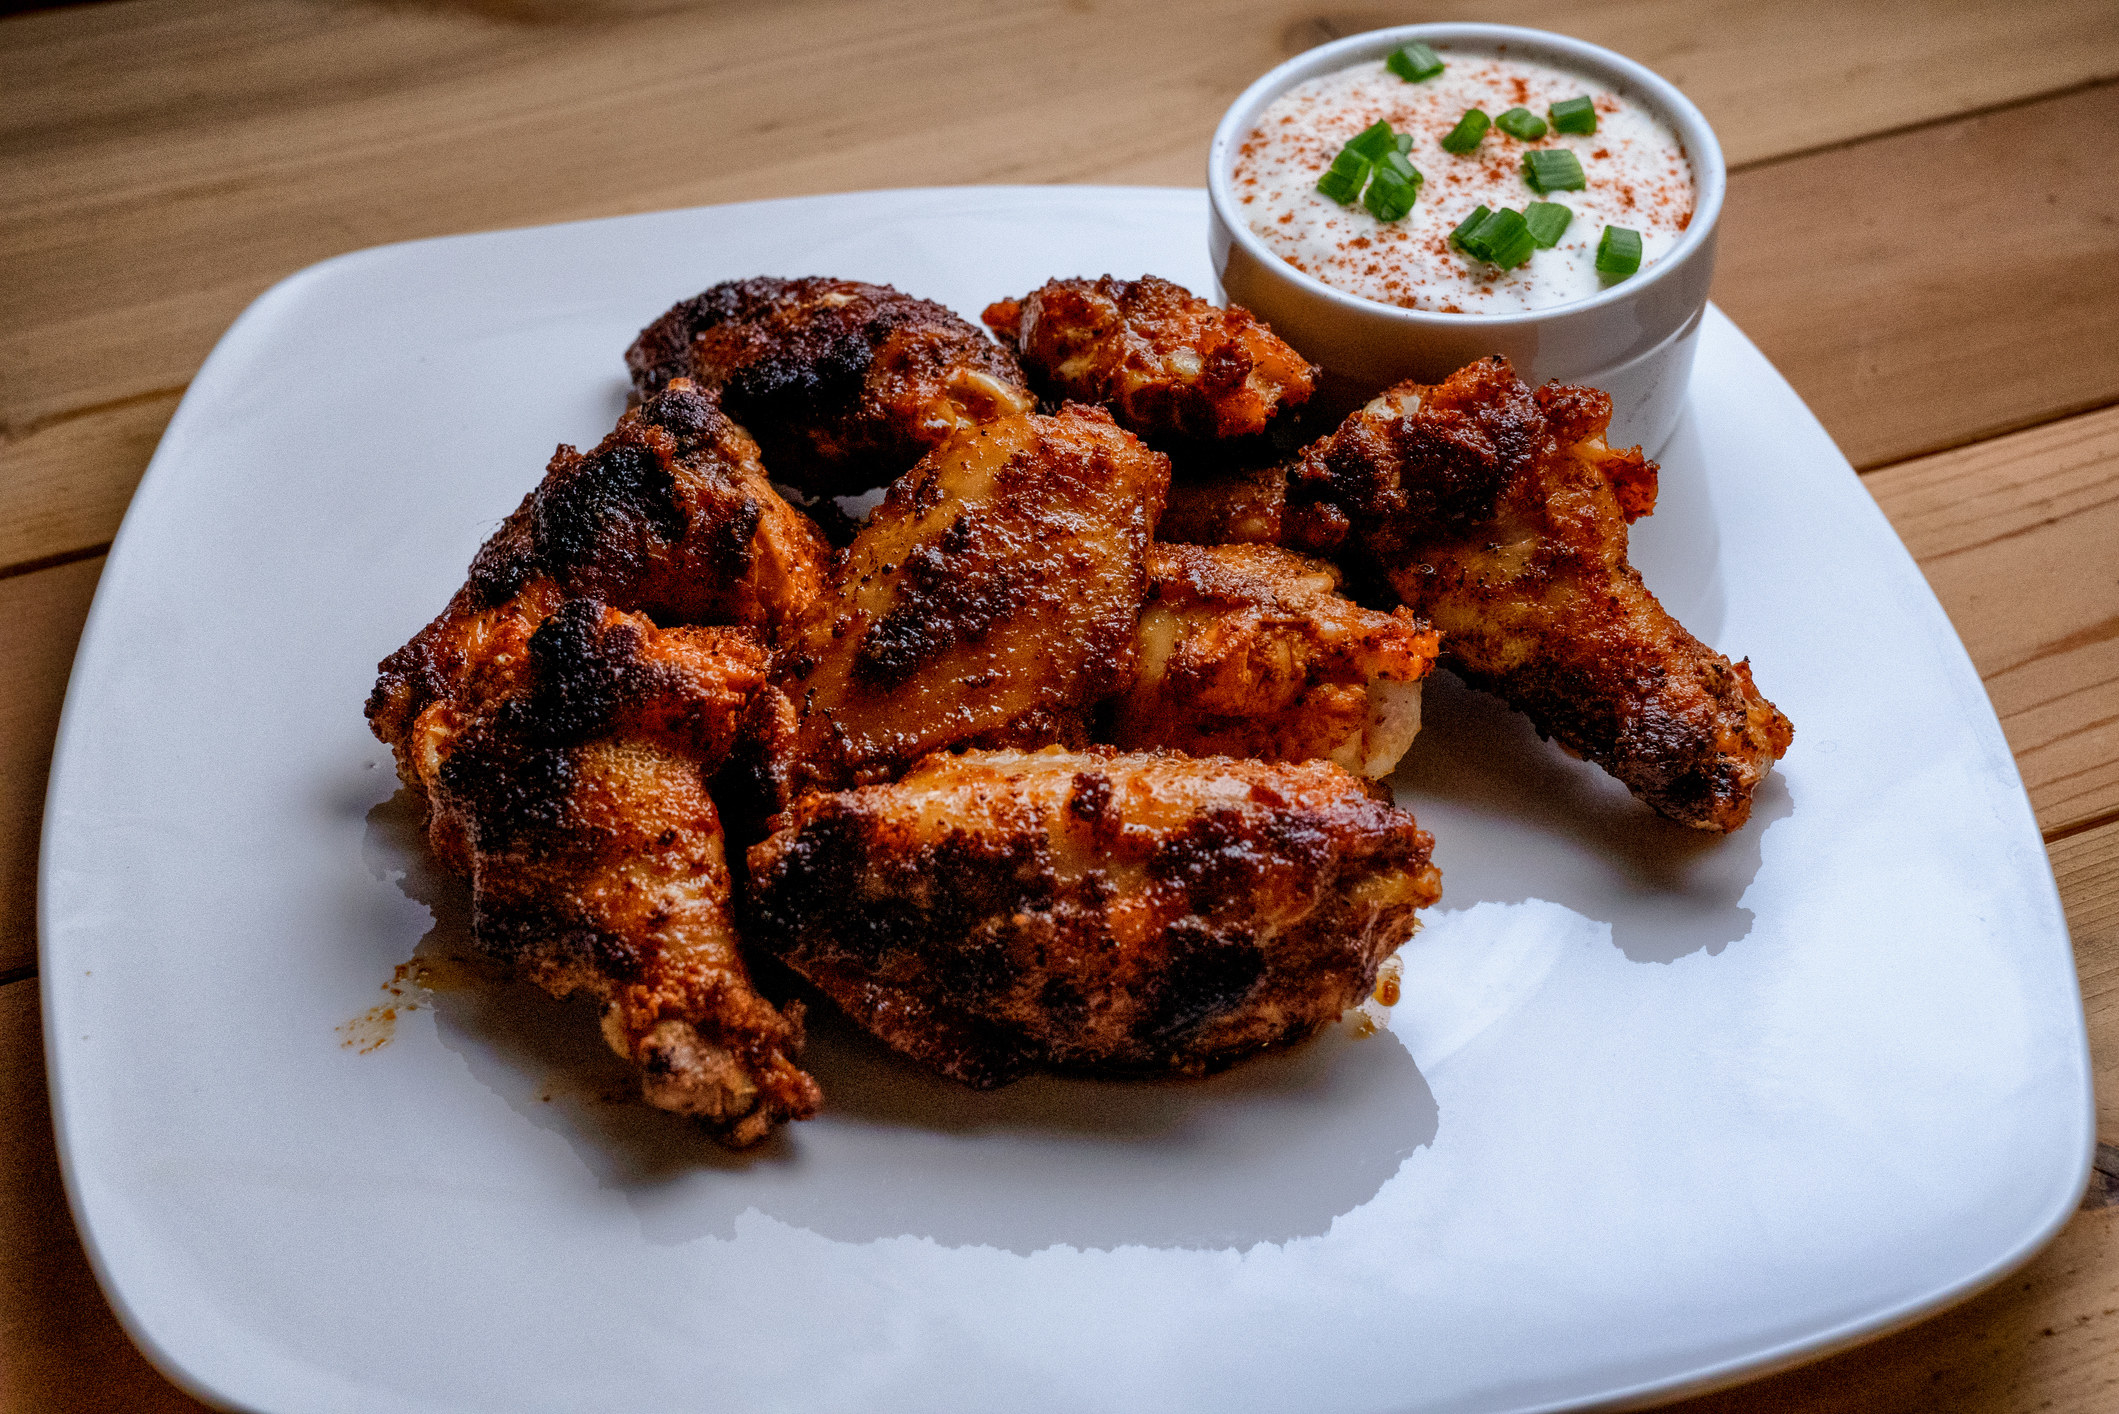 Plate of Buffalo chicken wings with ranch dressing